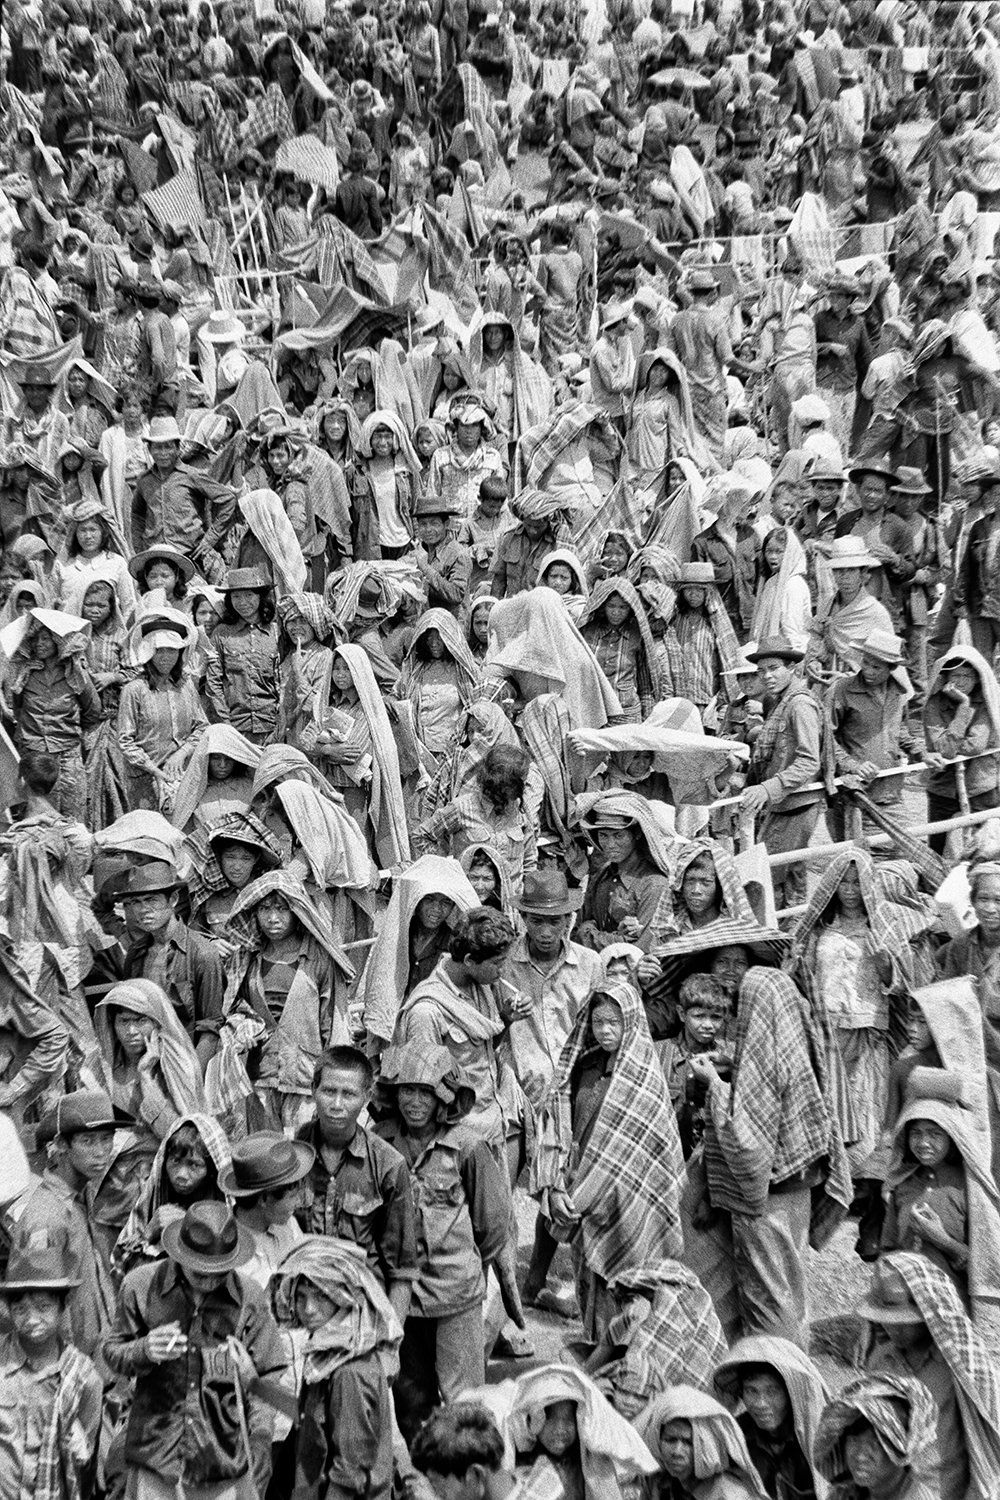 Cambodian people at the Khao-I-Dang refugee camp located at the Thai-Cambodia border circa 1980 Photography Pierre Toutain-Dorbec.jpg